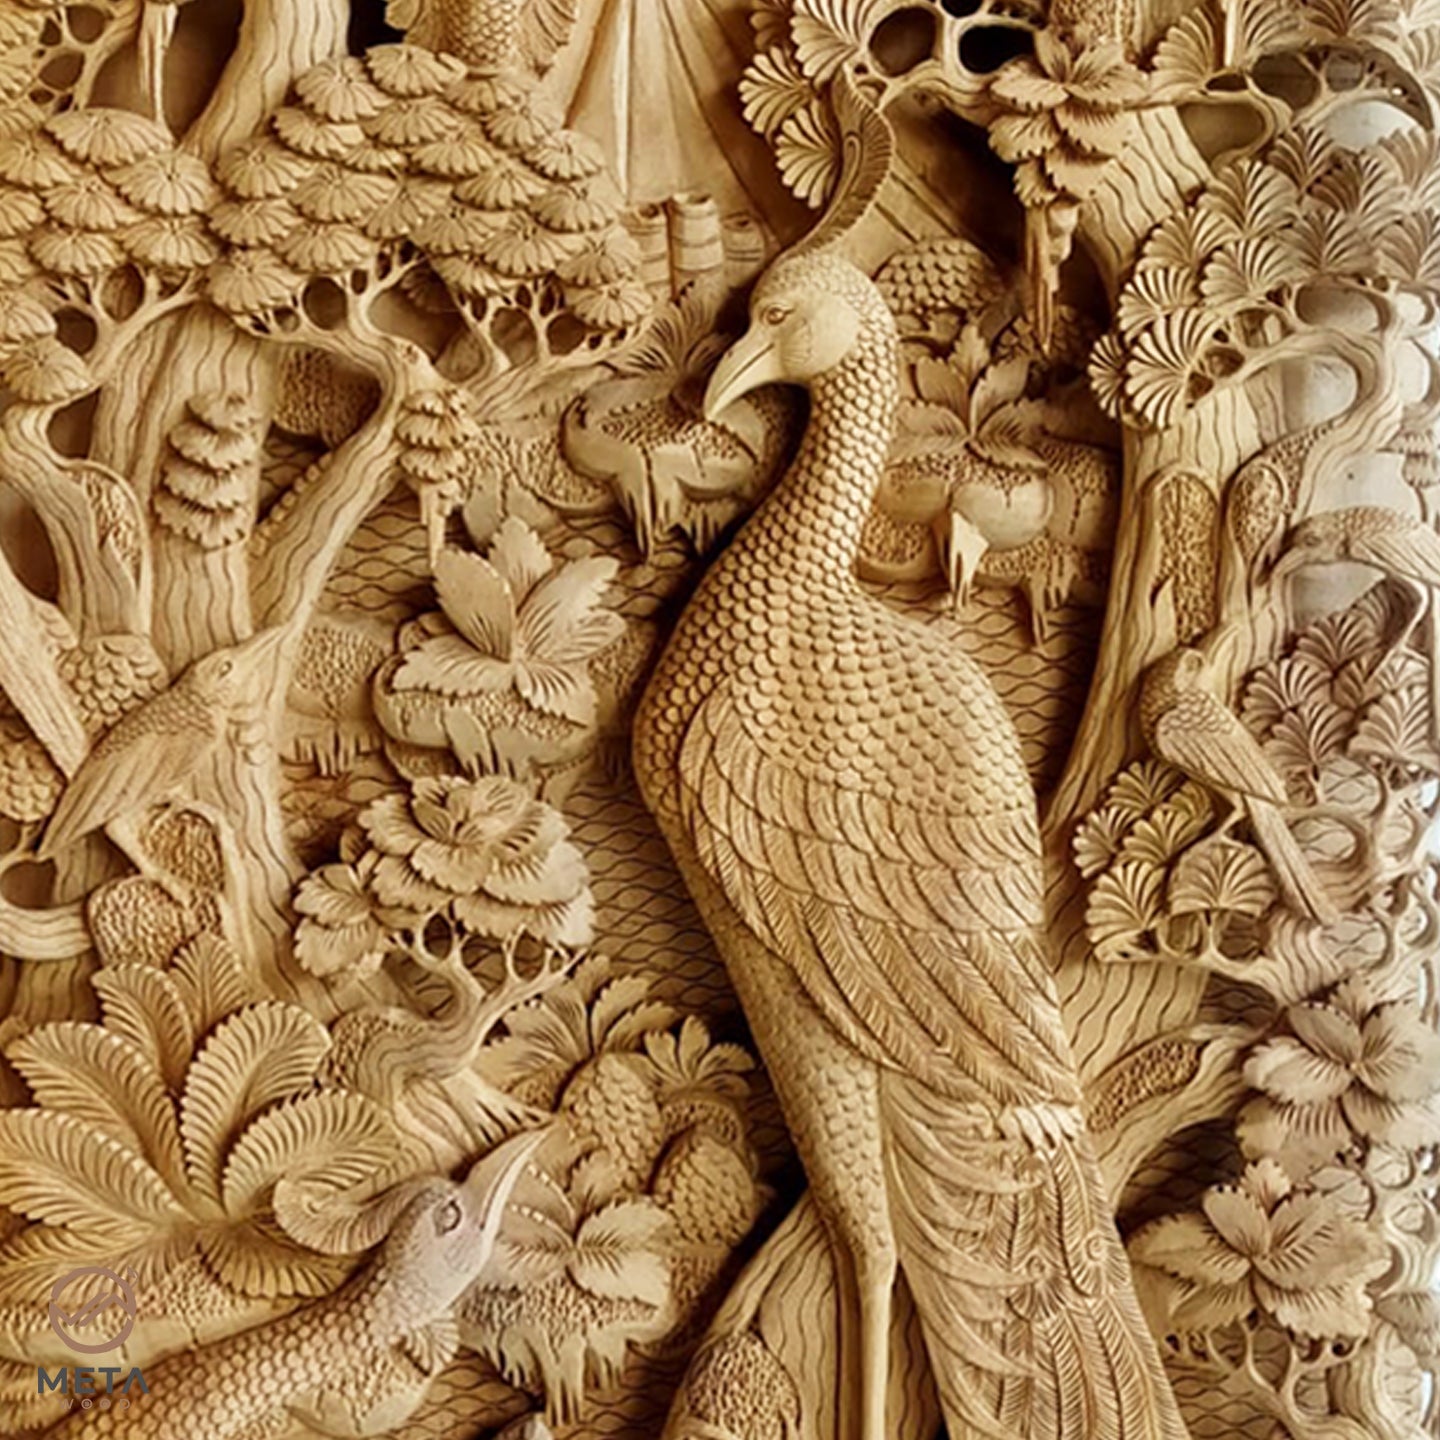 peacock the traditional work wood carving, wood design, UP wood art, art  wood